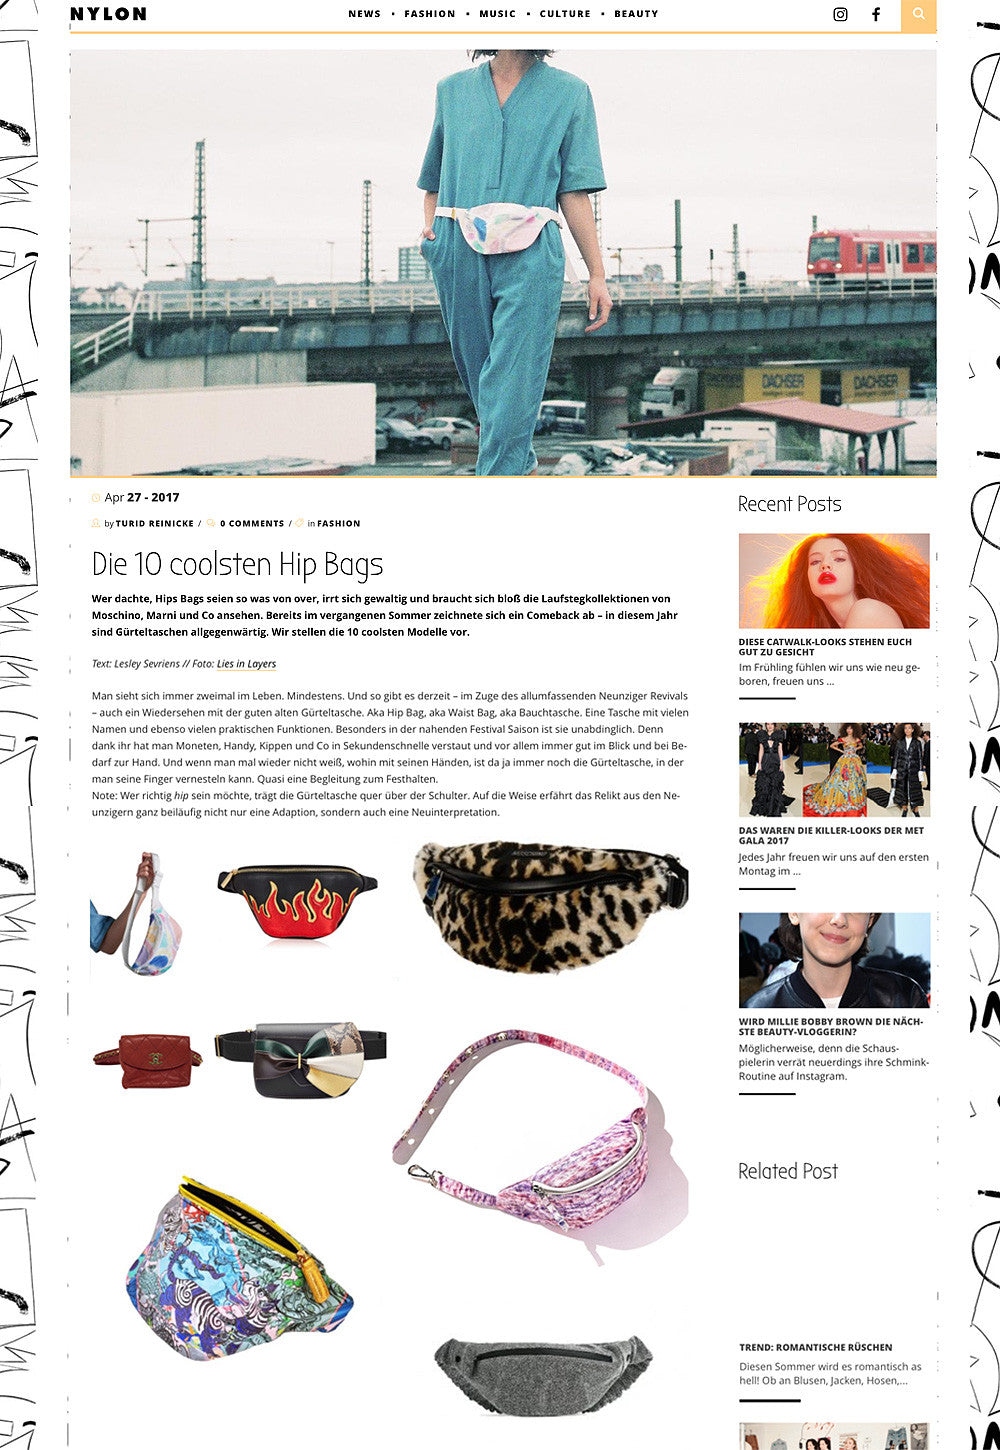 EARLY AT NYLON MAGAZINE TOP 10 COOLEST HIPBAGS